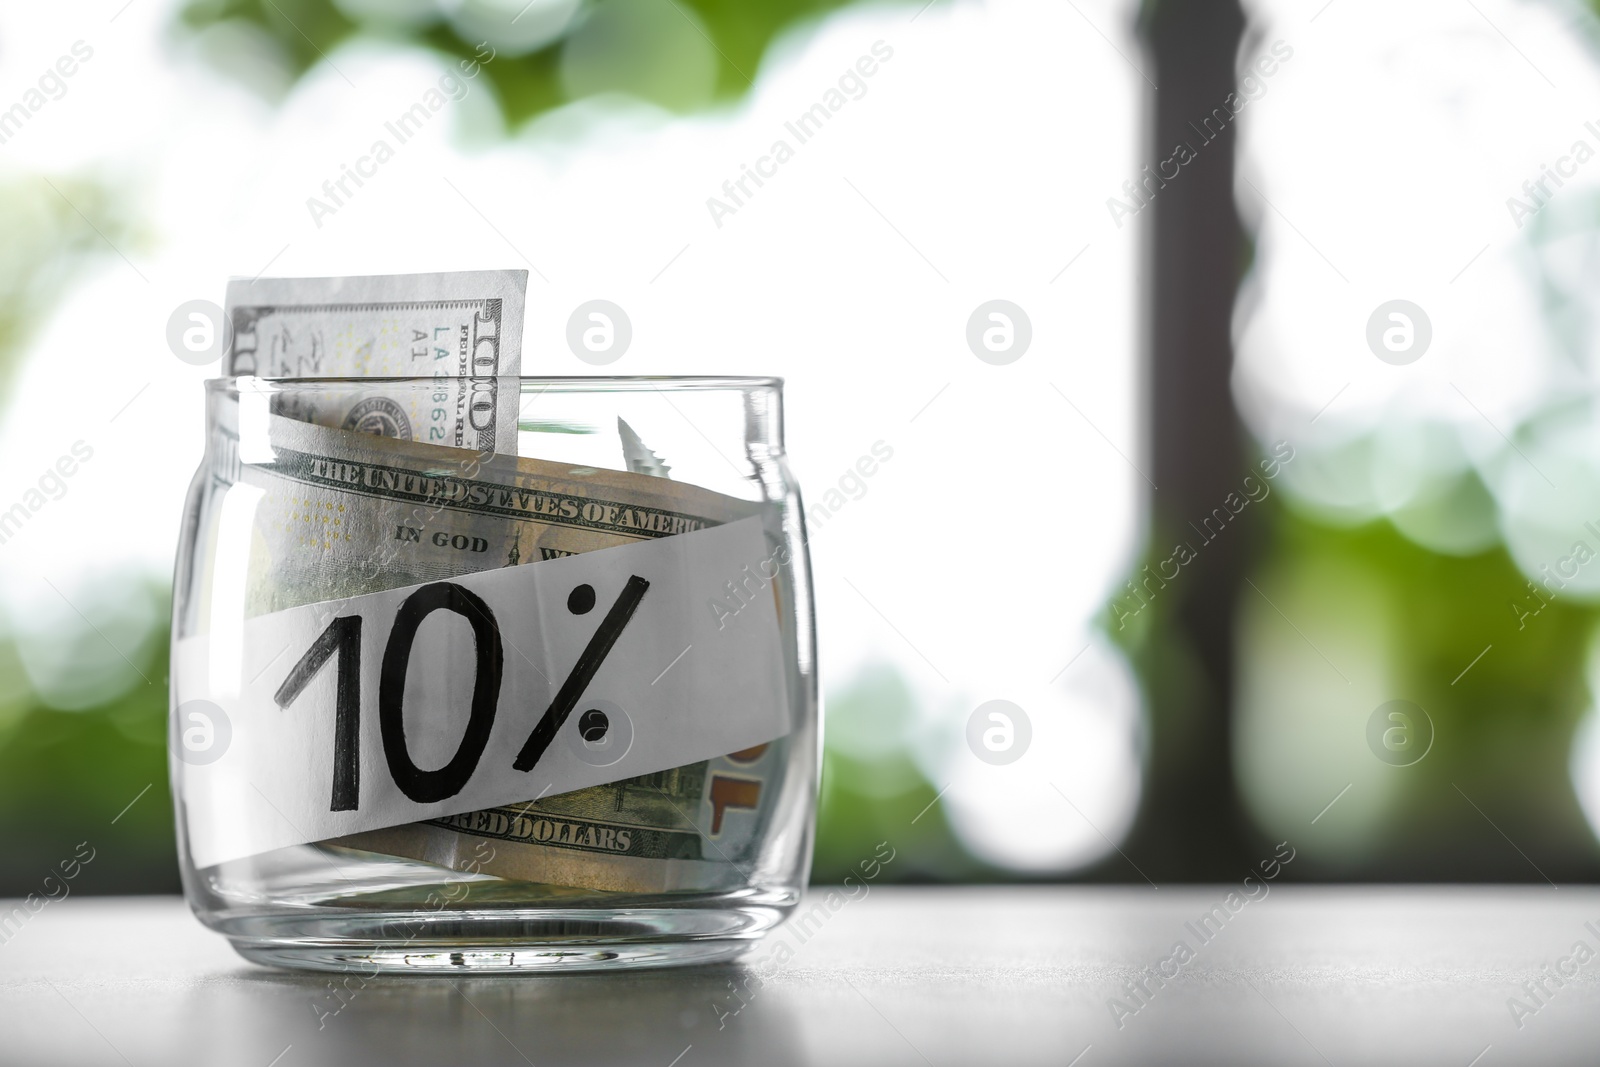 Photo of 10 PERCENT written on paper and money in jar against blurred background, space for text